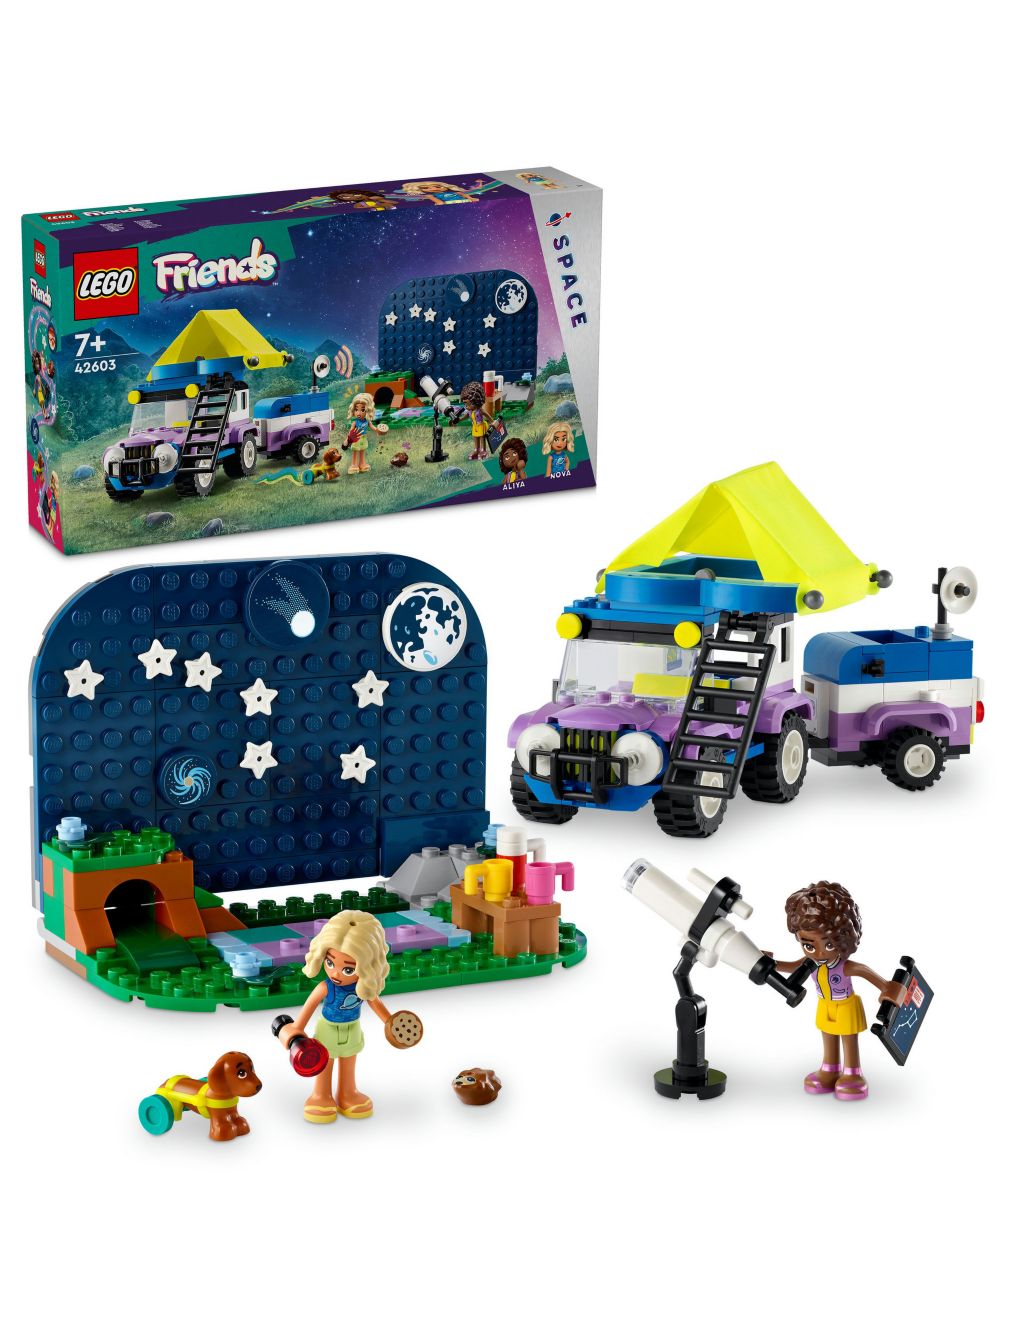 LEGO® Friends Stargazing Camping Vehicle Toy 42603 (7+ Yrs)